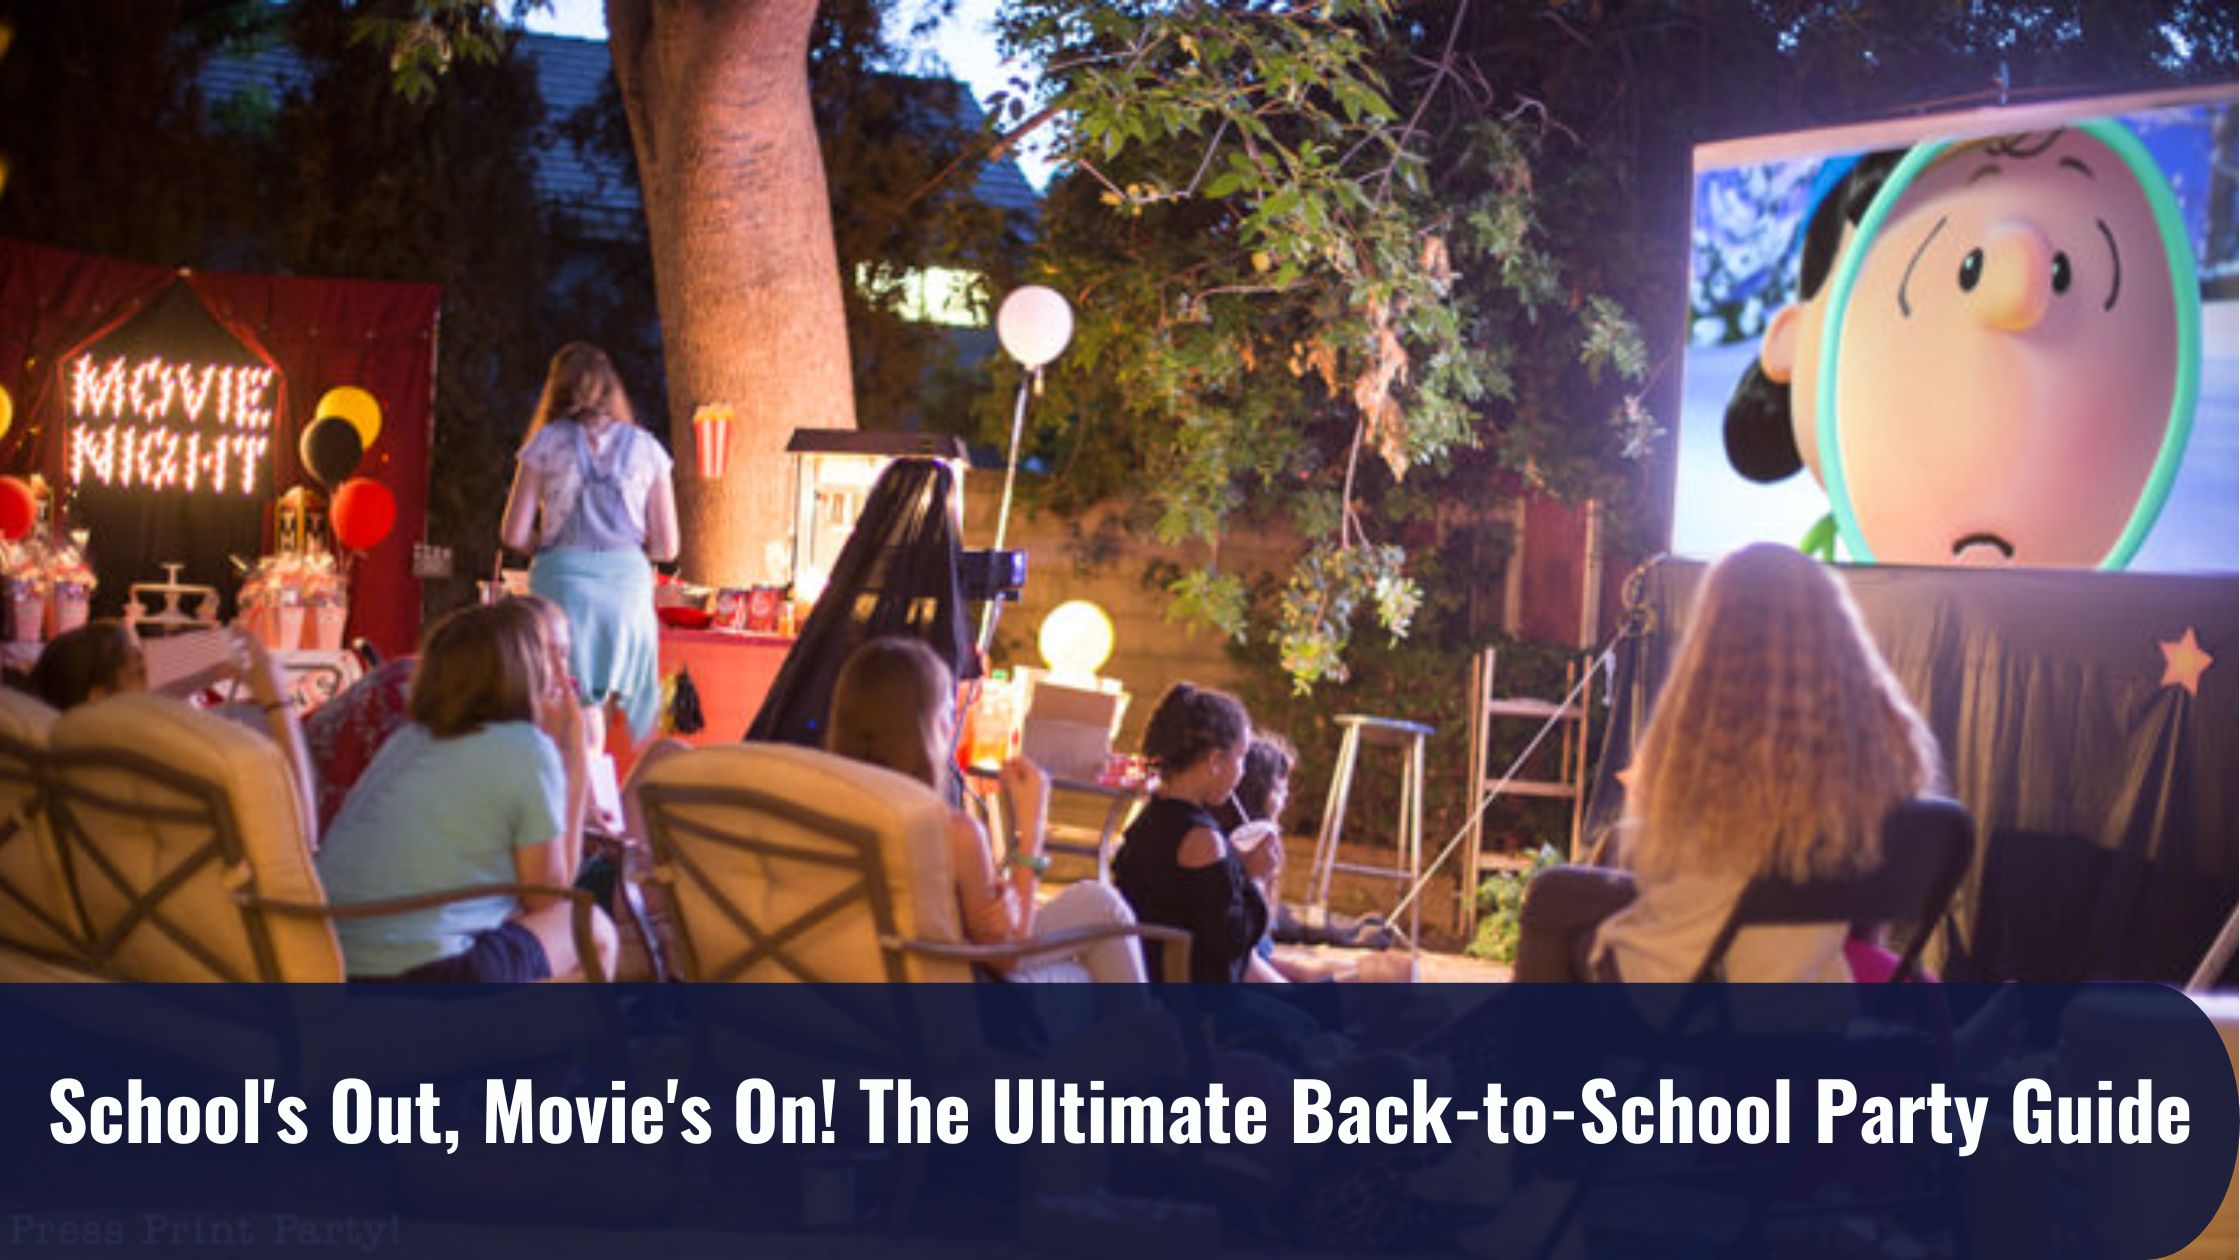 School’s Out, Movie’s On! The Ultimate Back-to-School Party Guide